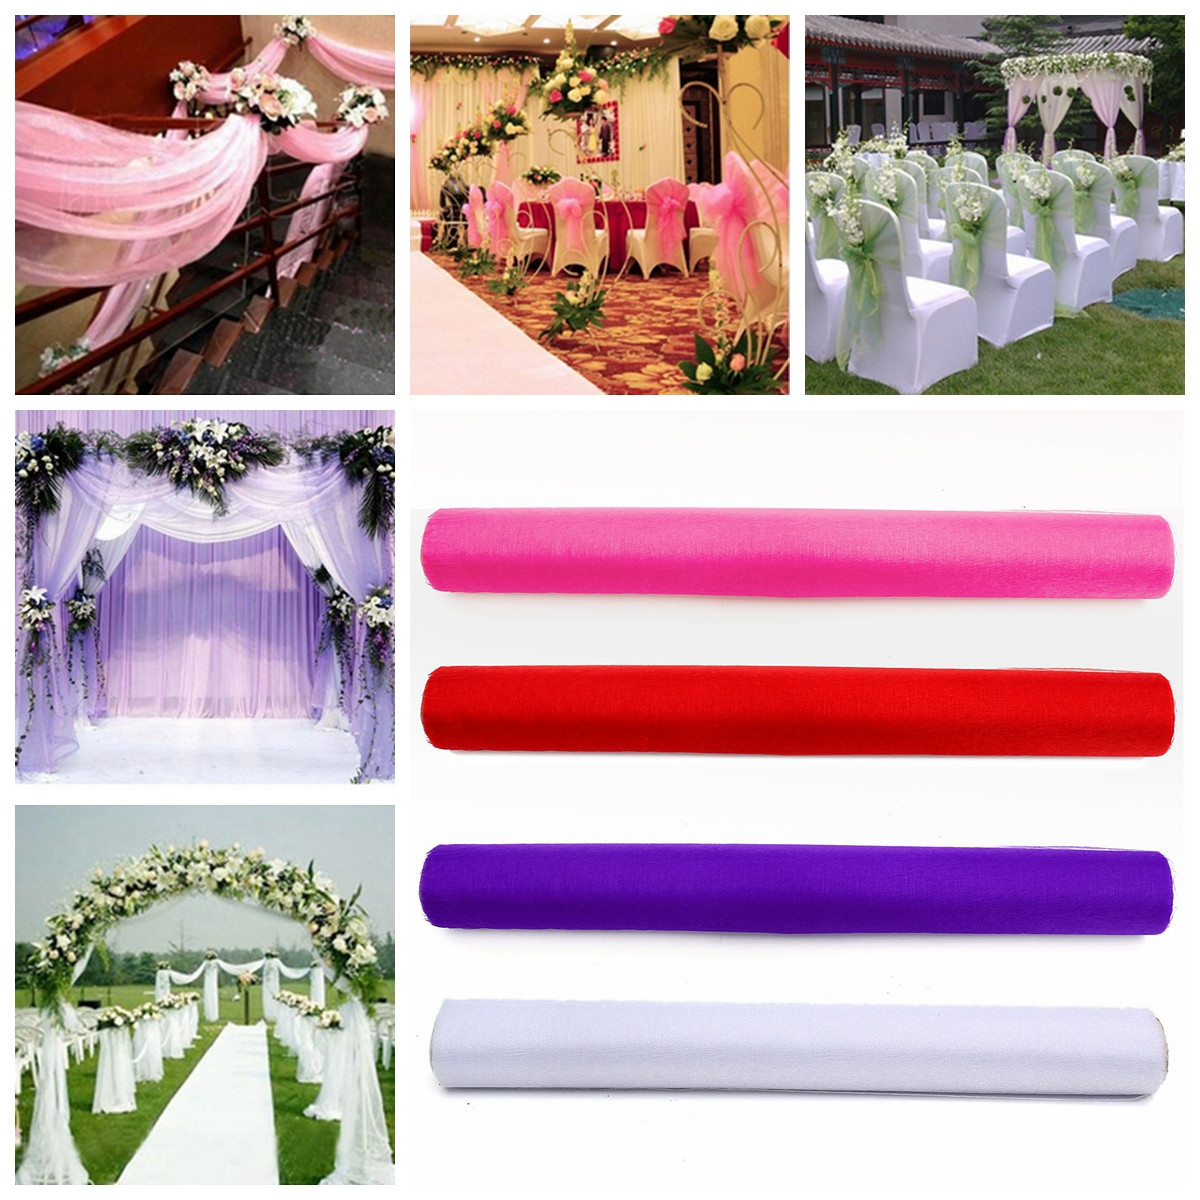 Time to Sparkle TtS 26M x 29cm Sheer Organza Fabric Roll Sash Table Runner chair Sashes Chair Cover Bows Swags Wedding Party White